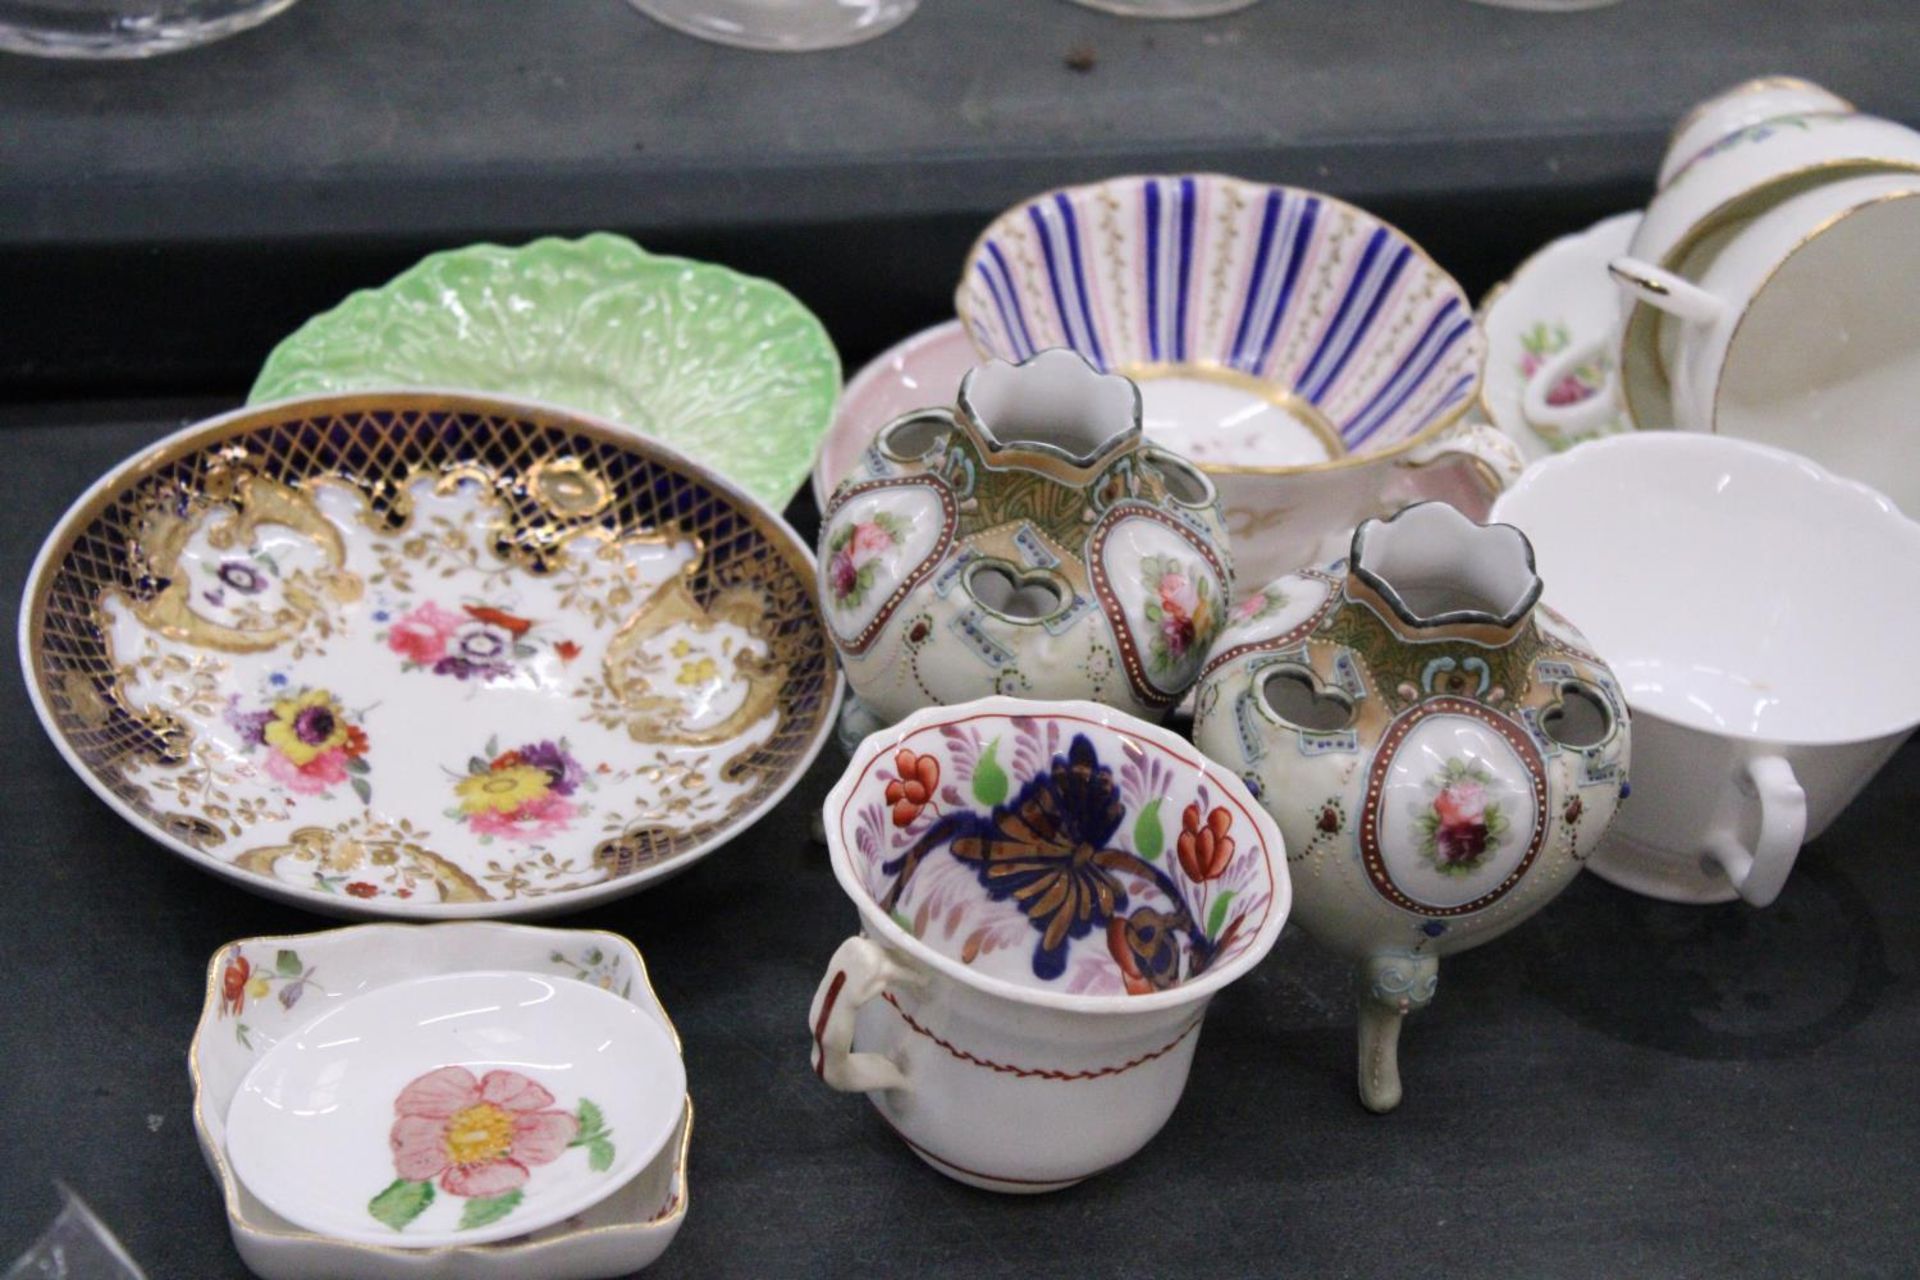 A FOLEY CHINA PART TEASET TO INCLUDE A CAKE PLATE, A CREAM JUG, SUGAR BOWL, CUPS, SAUCERS AND SIDE - Bild 5 aus 6